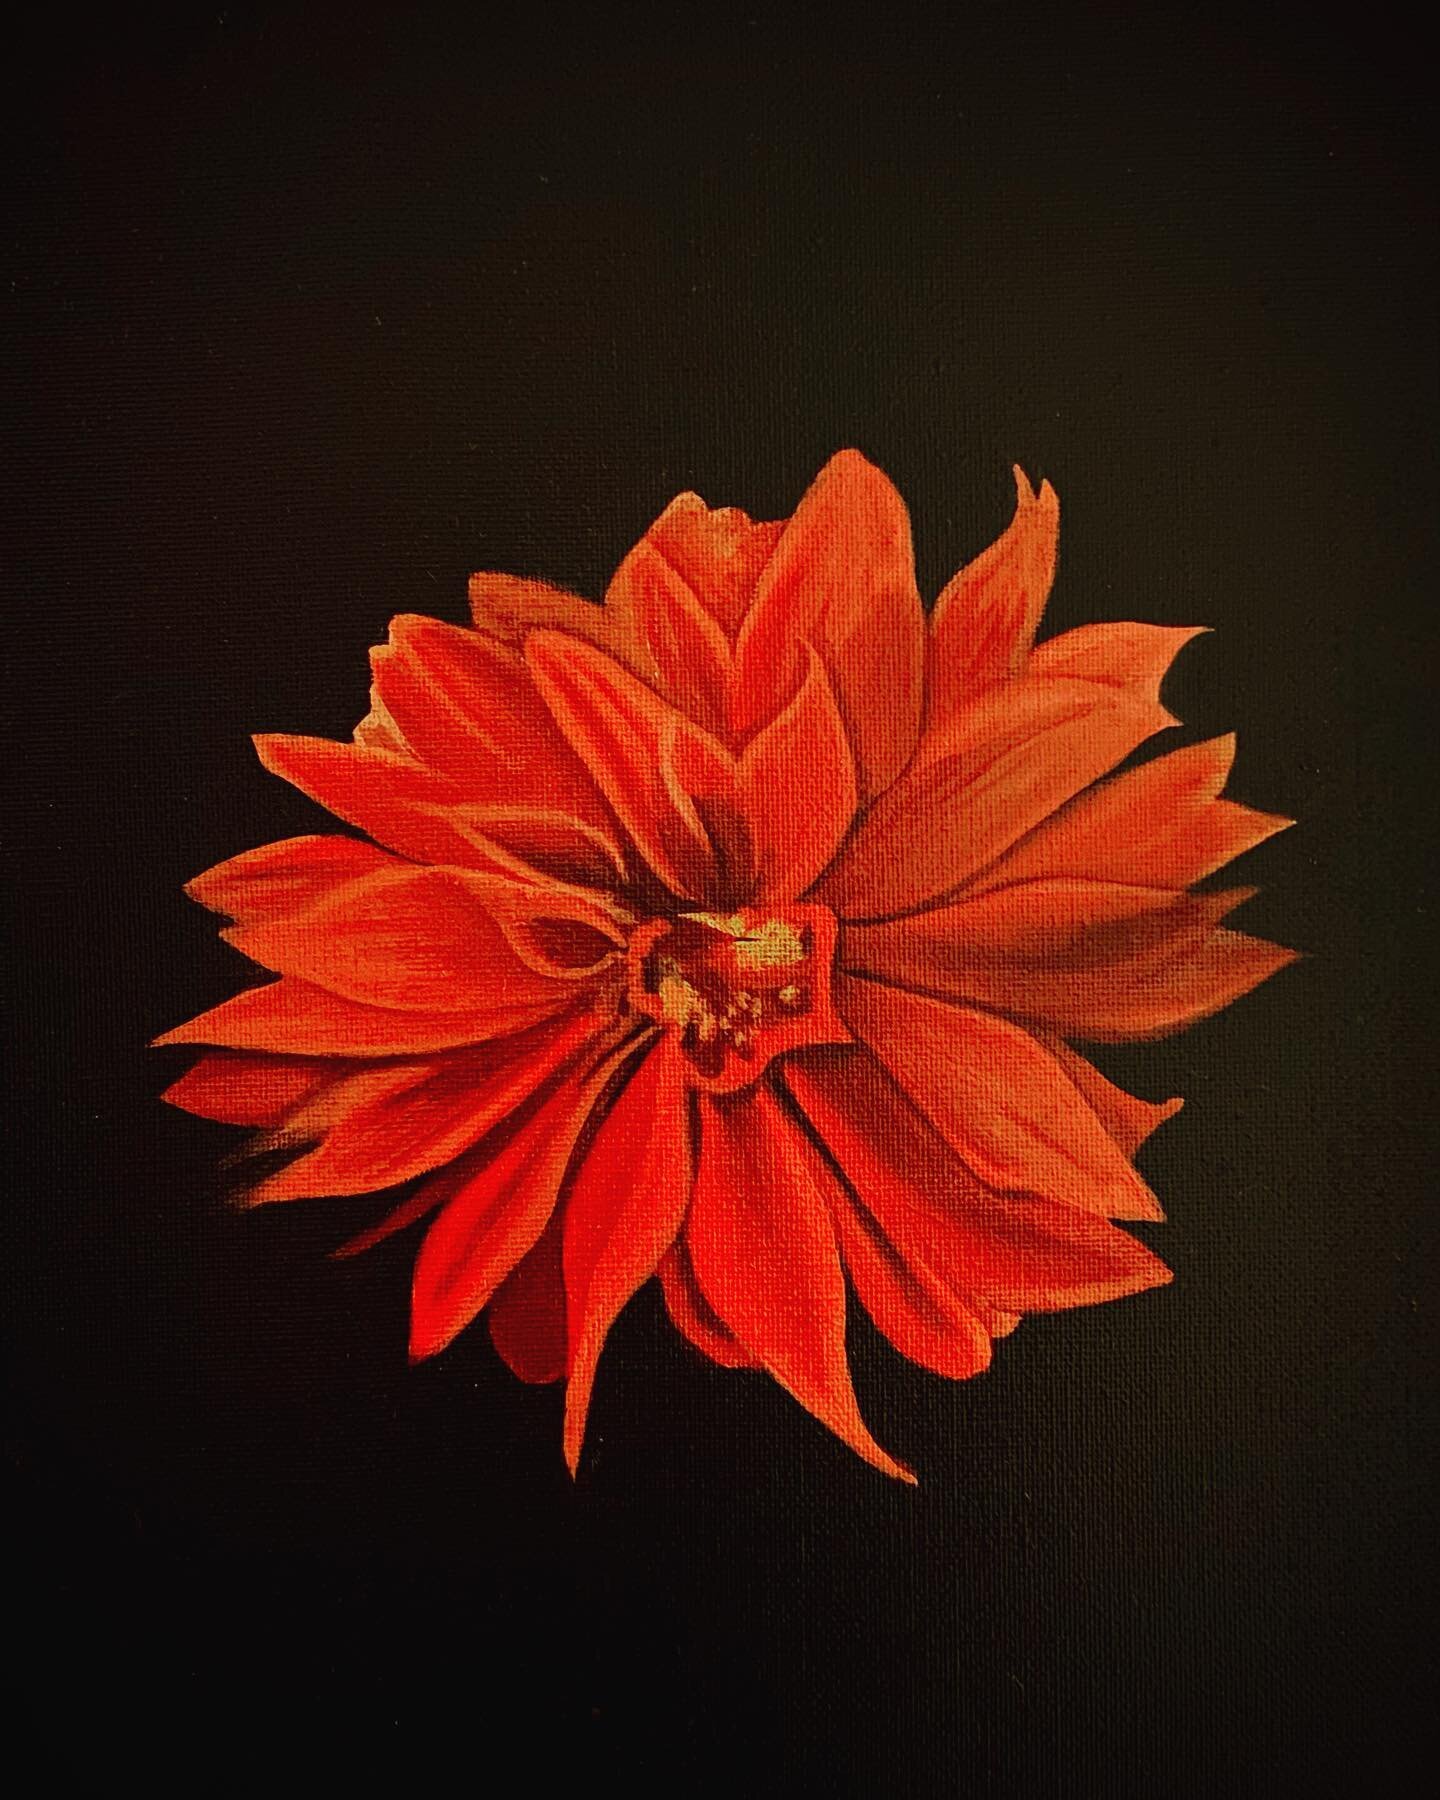 New small painting of a flower from my sister&rsquo;s garden:

&ldquo;Dahlia&rdquo;
Oil on Canvas
12&rdquo; x 9&rdquo;